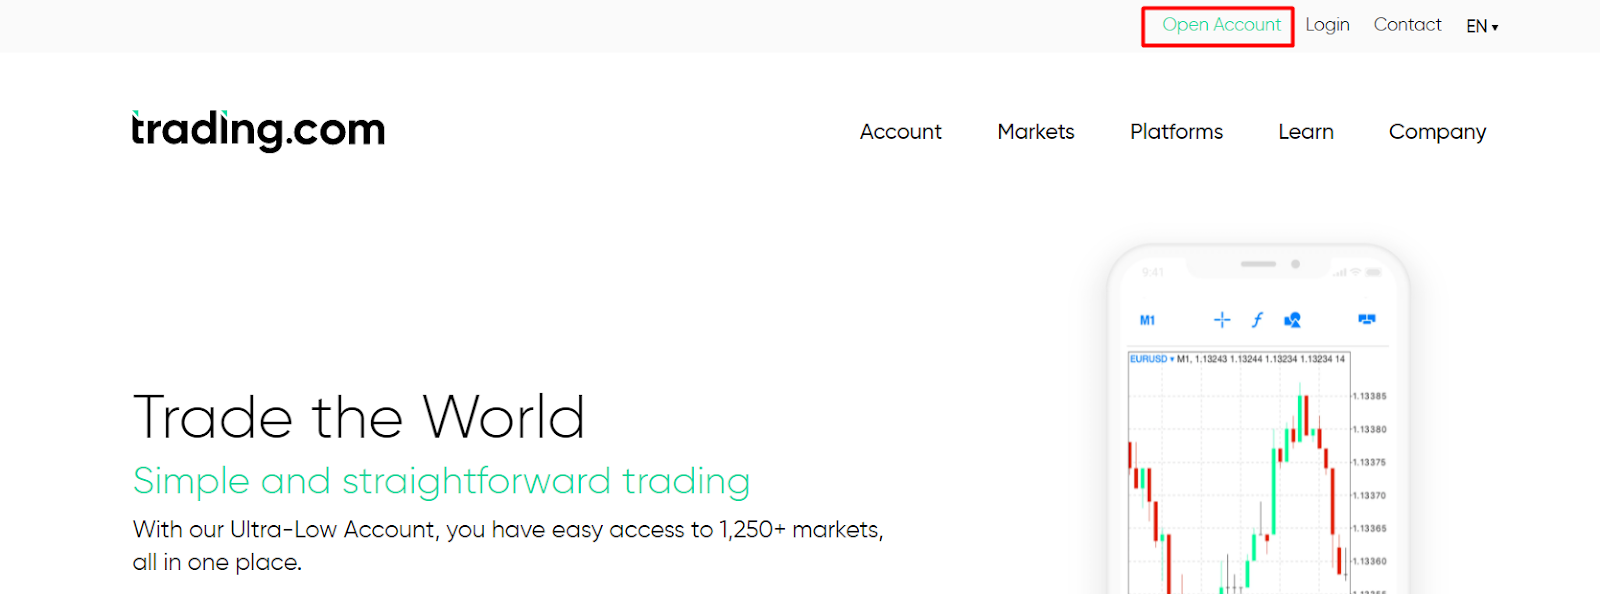 Trading.com Review - Account opening